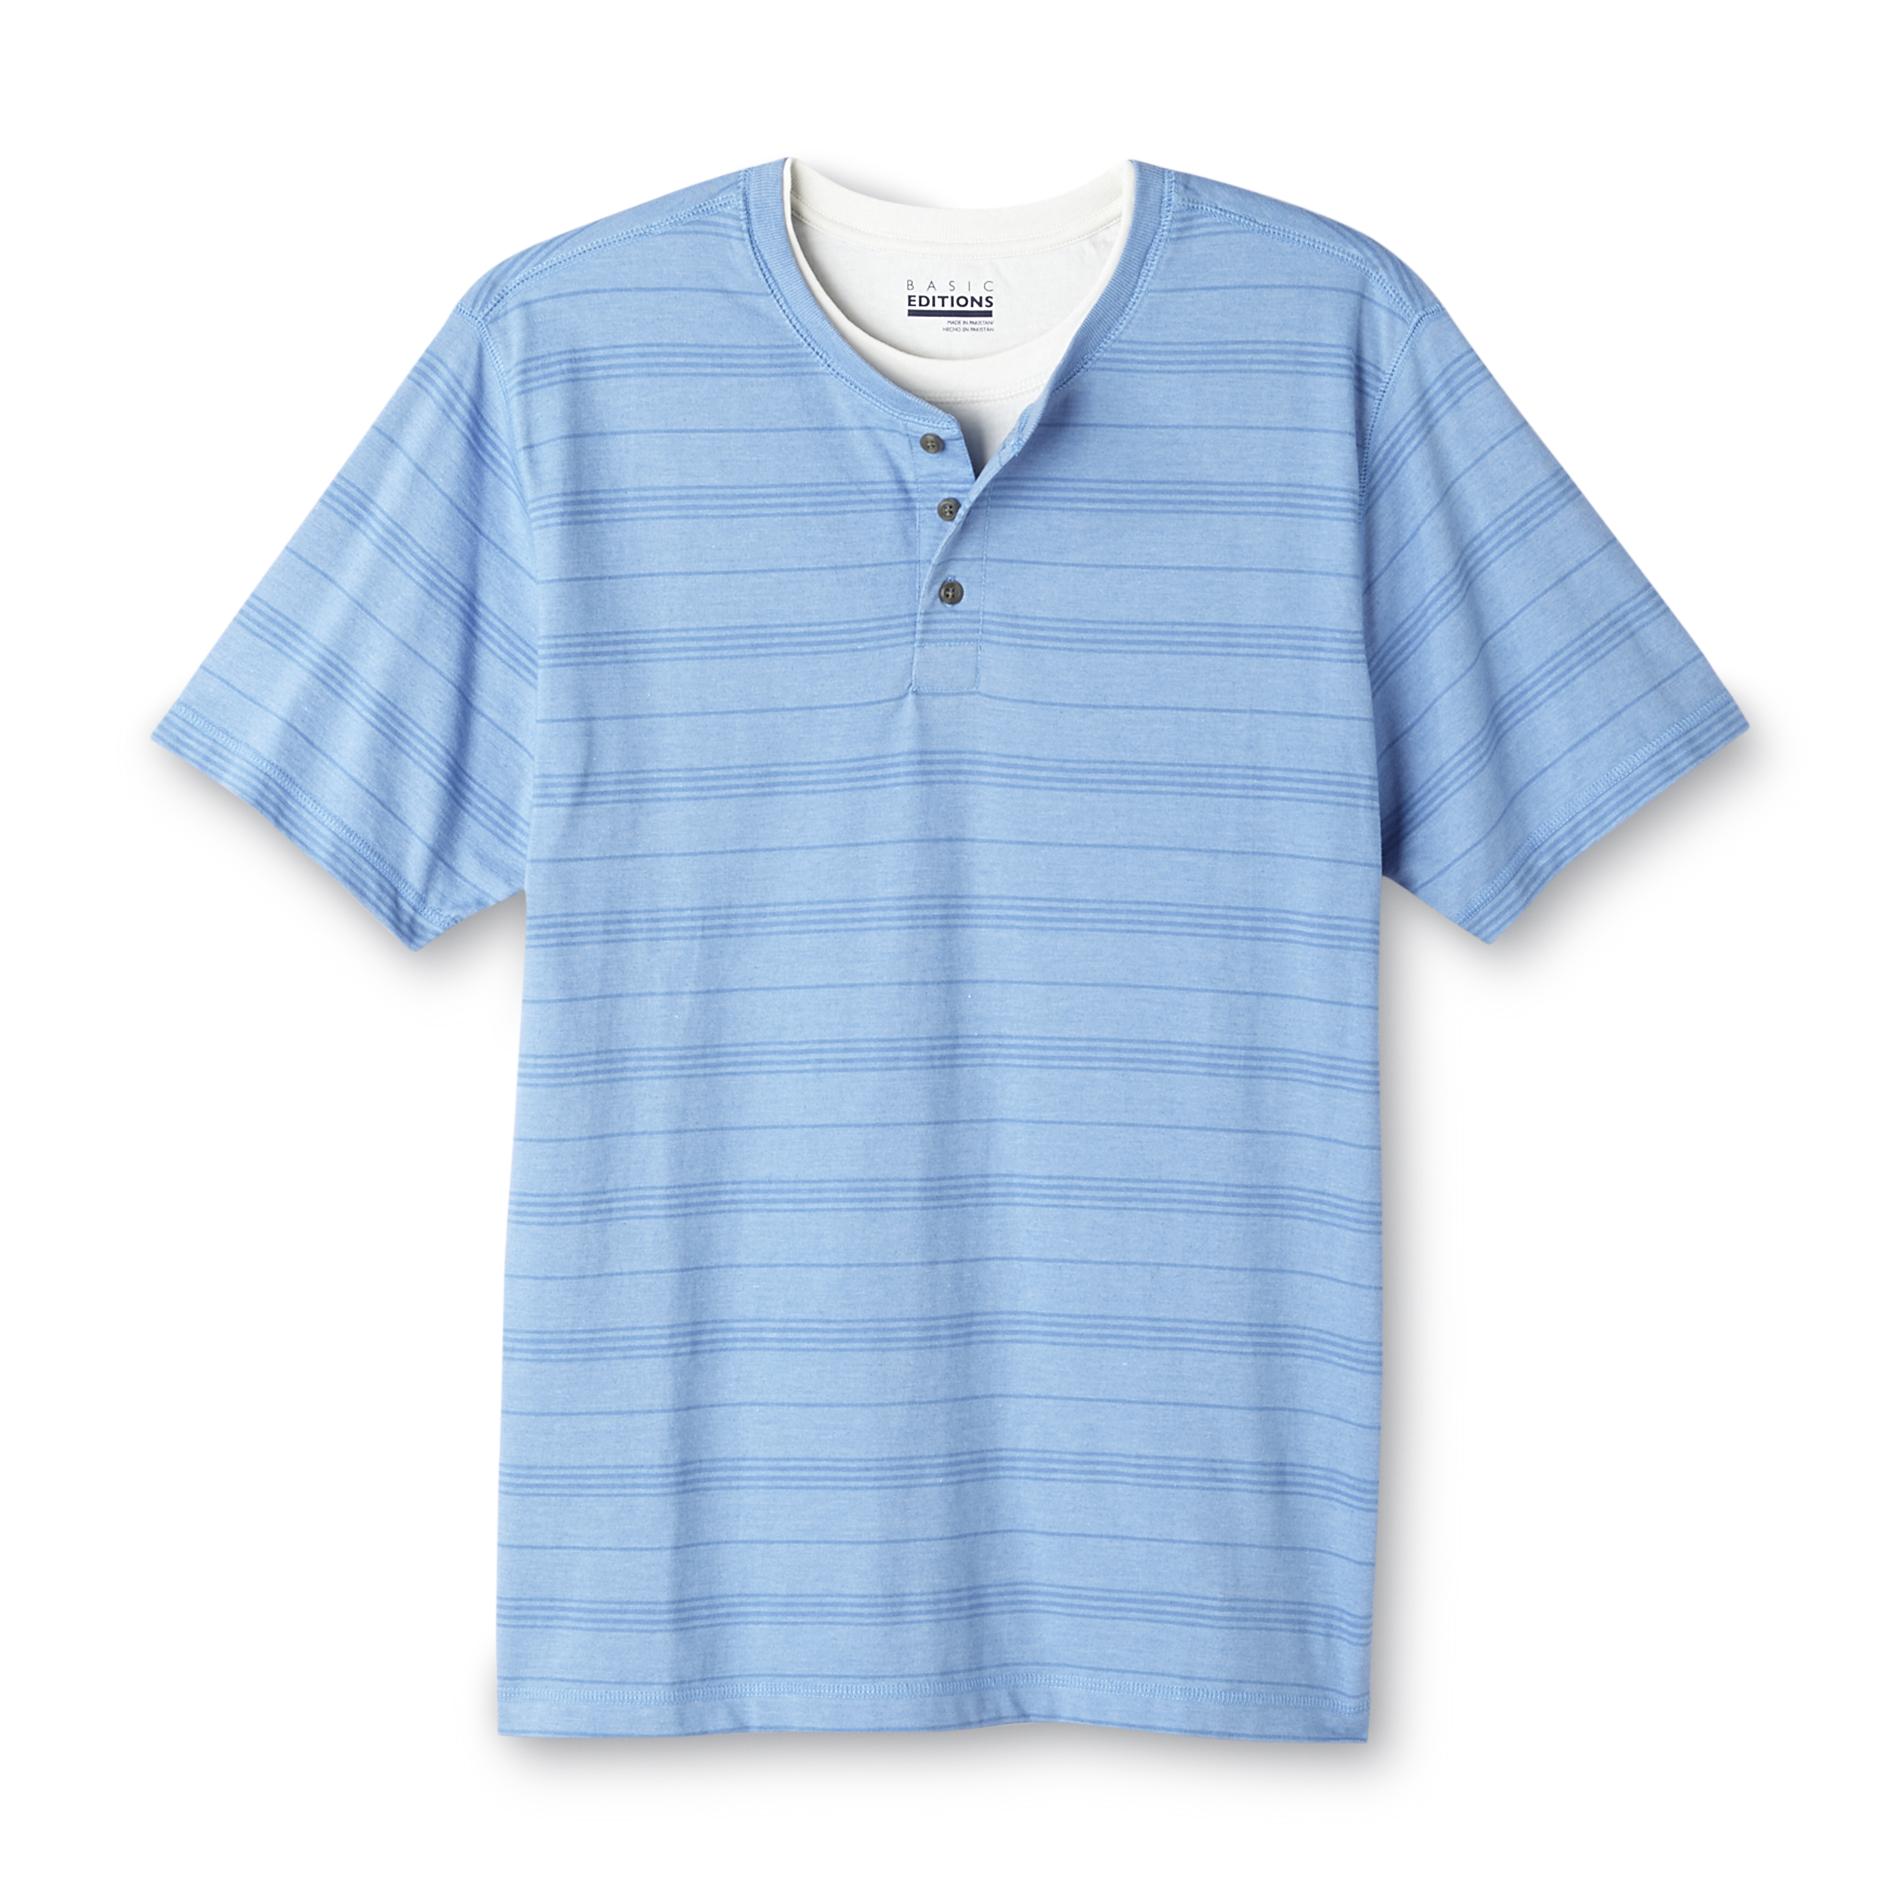 Basic Editions Men's Layered-Look Henley - Striped